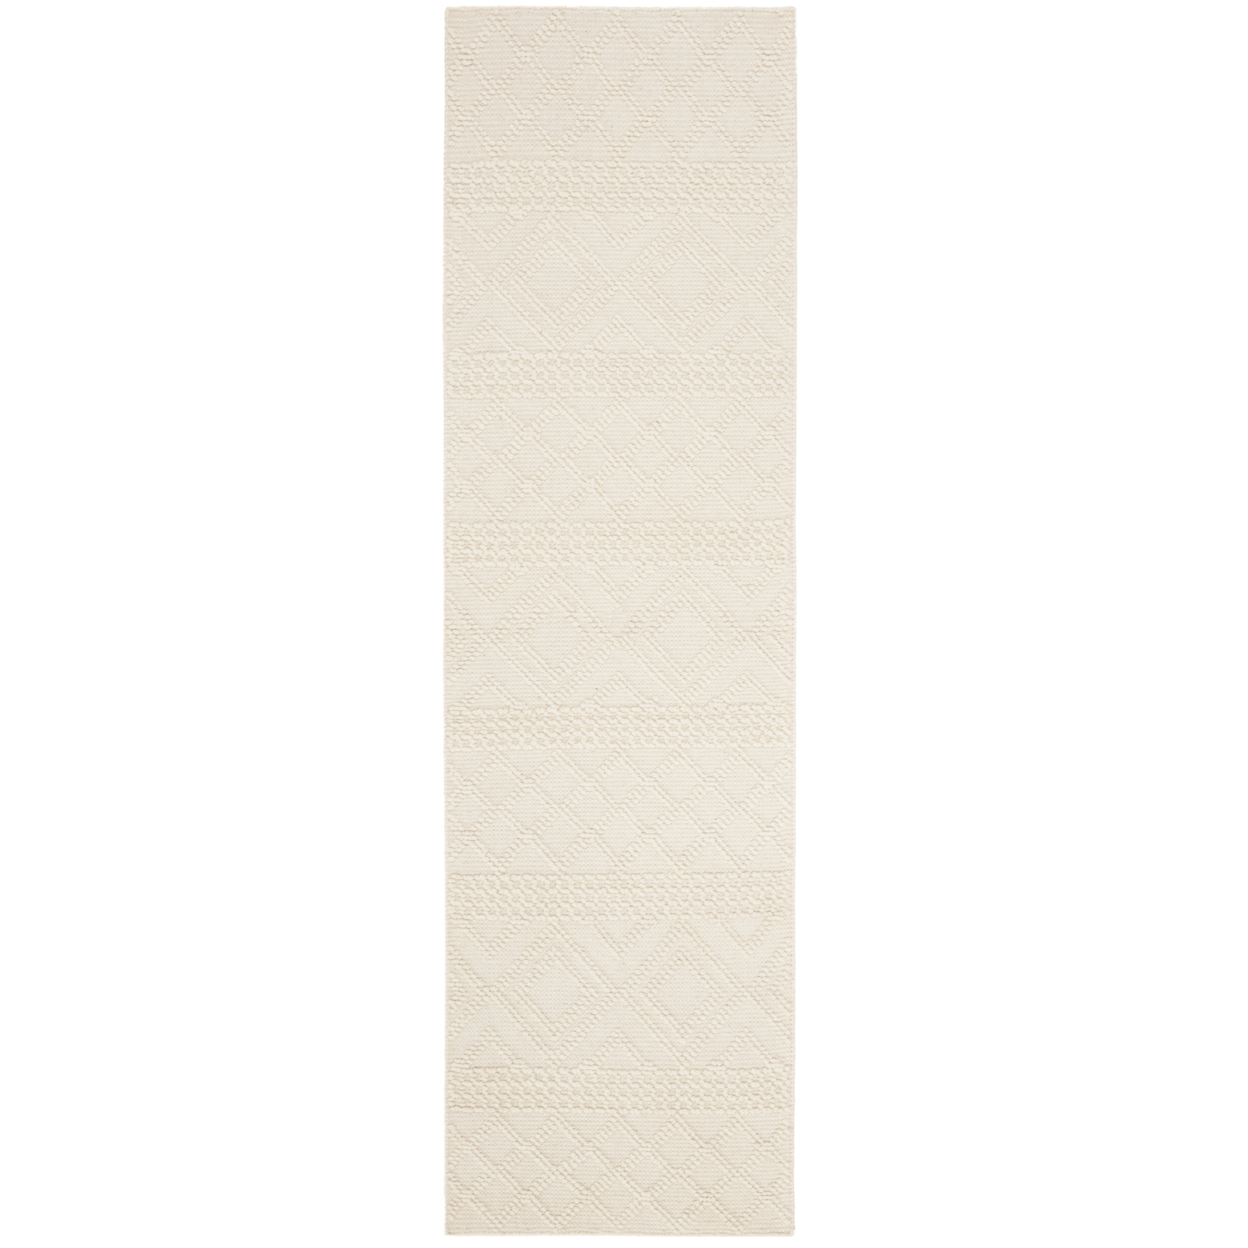 SAFAVIEH Vermont Collection VRM211A Handwoven Ivory Rug - 2-3 X 6